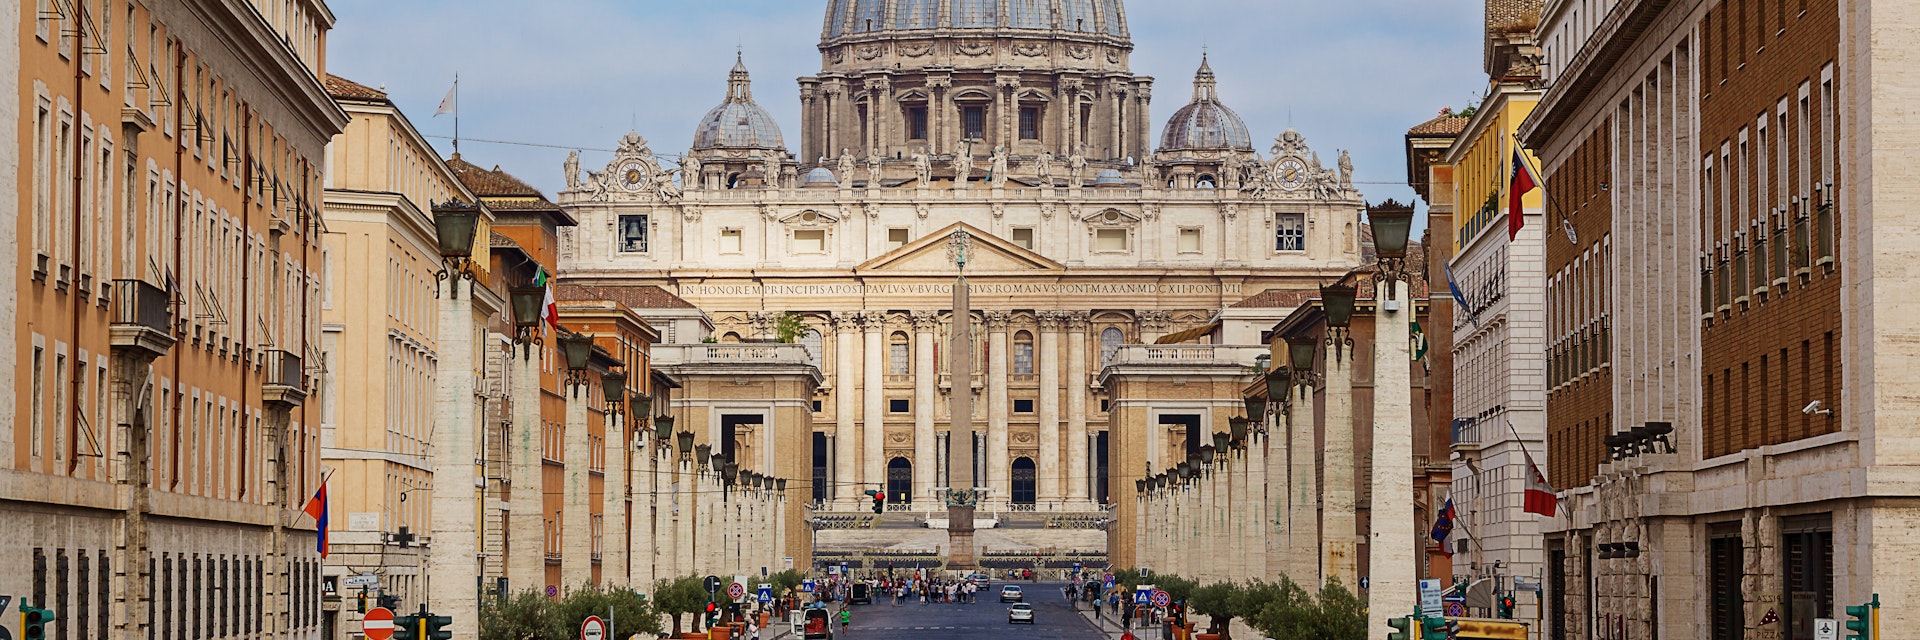 Basilica di San Pietro. Rome. Italy.
160245212
ancient, architecture, basilica, building, capital, cathedral, catholic, church, city, day, dome, egyptian, europe, exterior, facade, famous, front, heritage, historical, history, italian, italy, landmark, monument, obelisk, old, outdoor, peter, piazza, religion, roma, roman, rome, saint, san pietro, sightseeing, sky, square, st peter, street, touristic, travel, urban, vatican, view